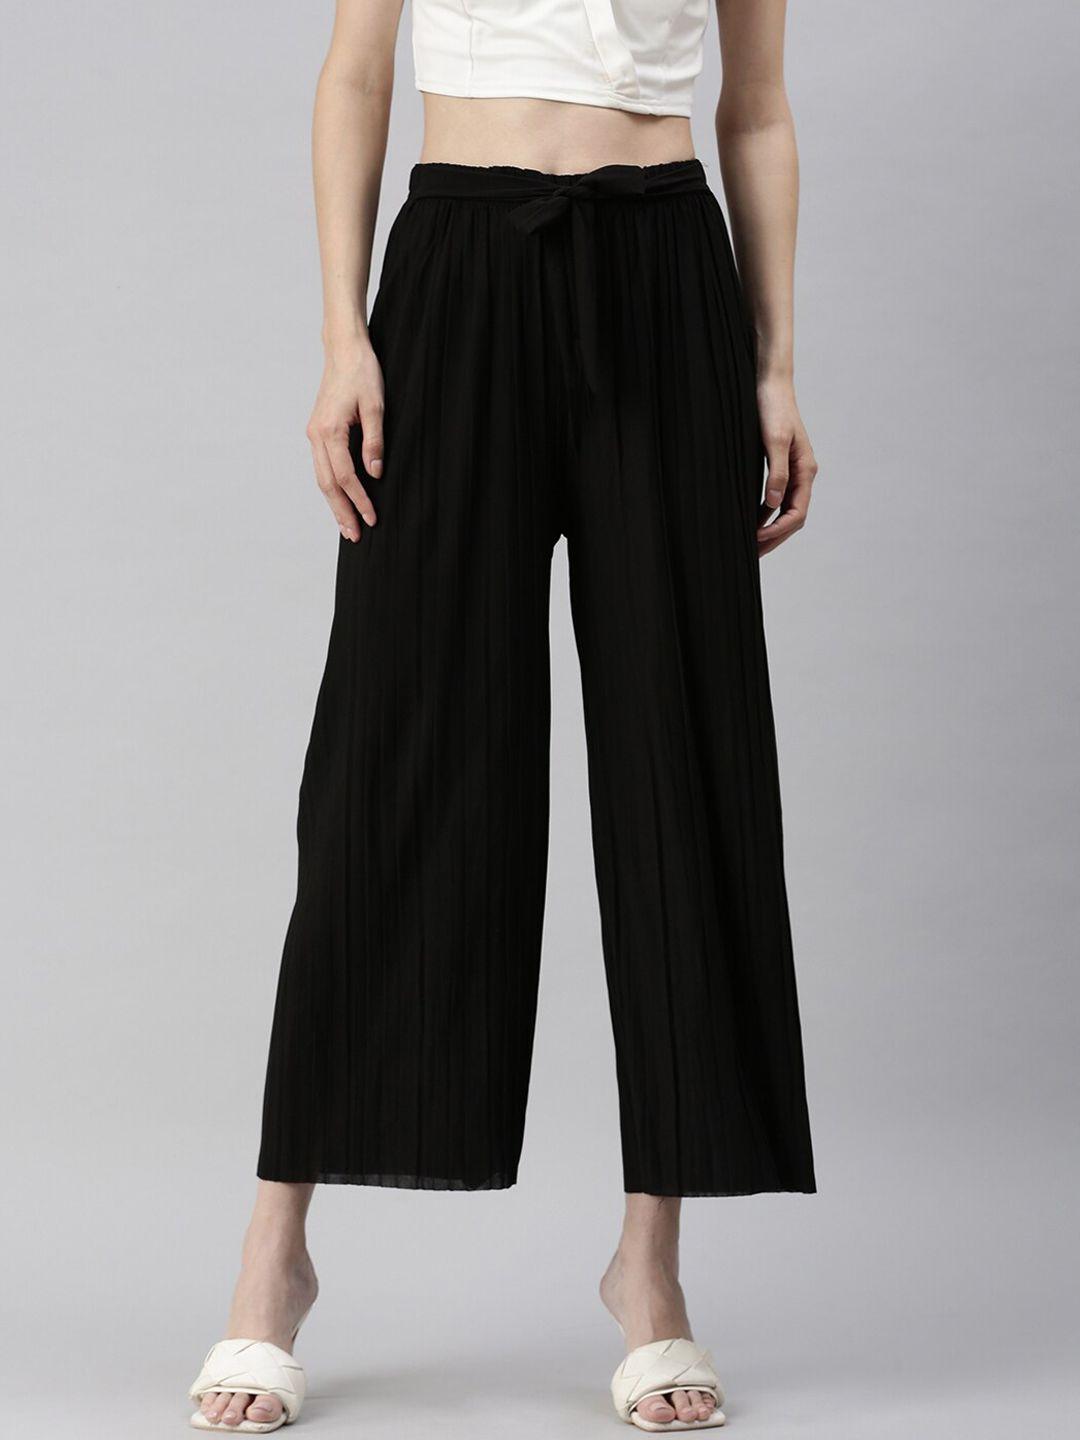 showoff-women-black-loose-fit-high-rise-trousers